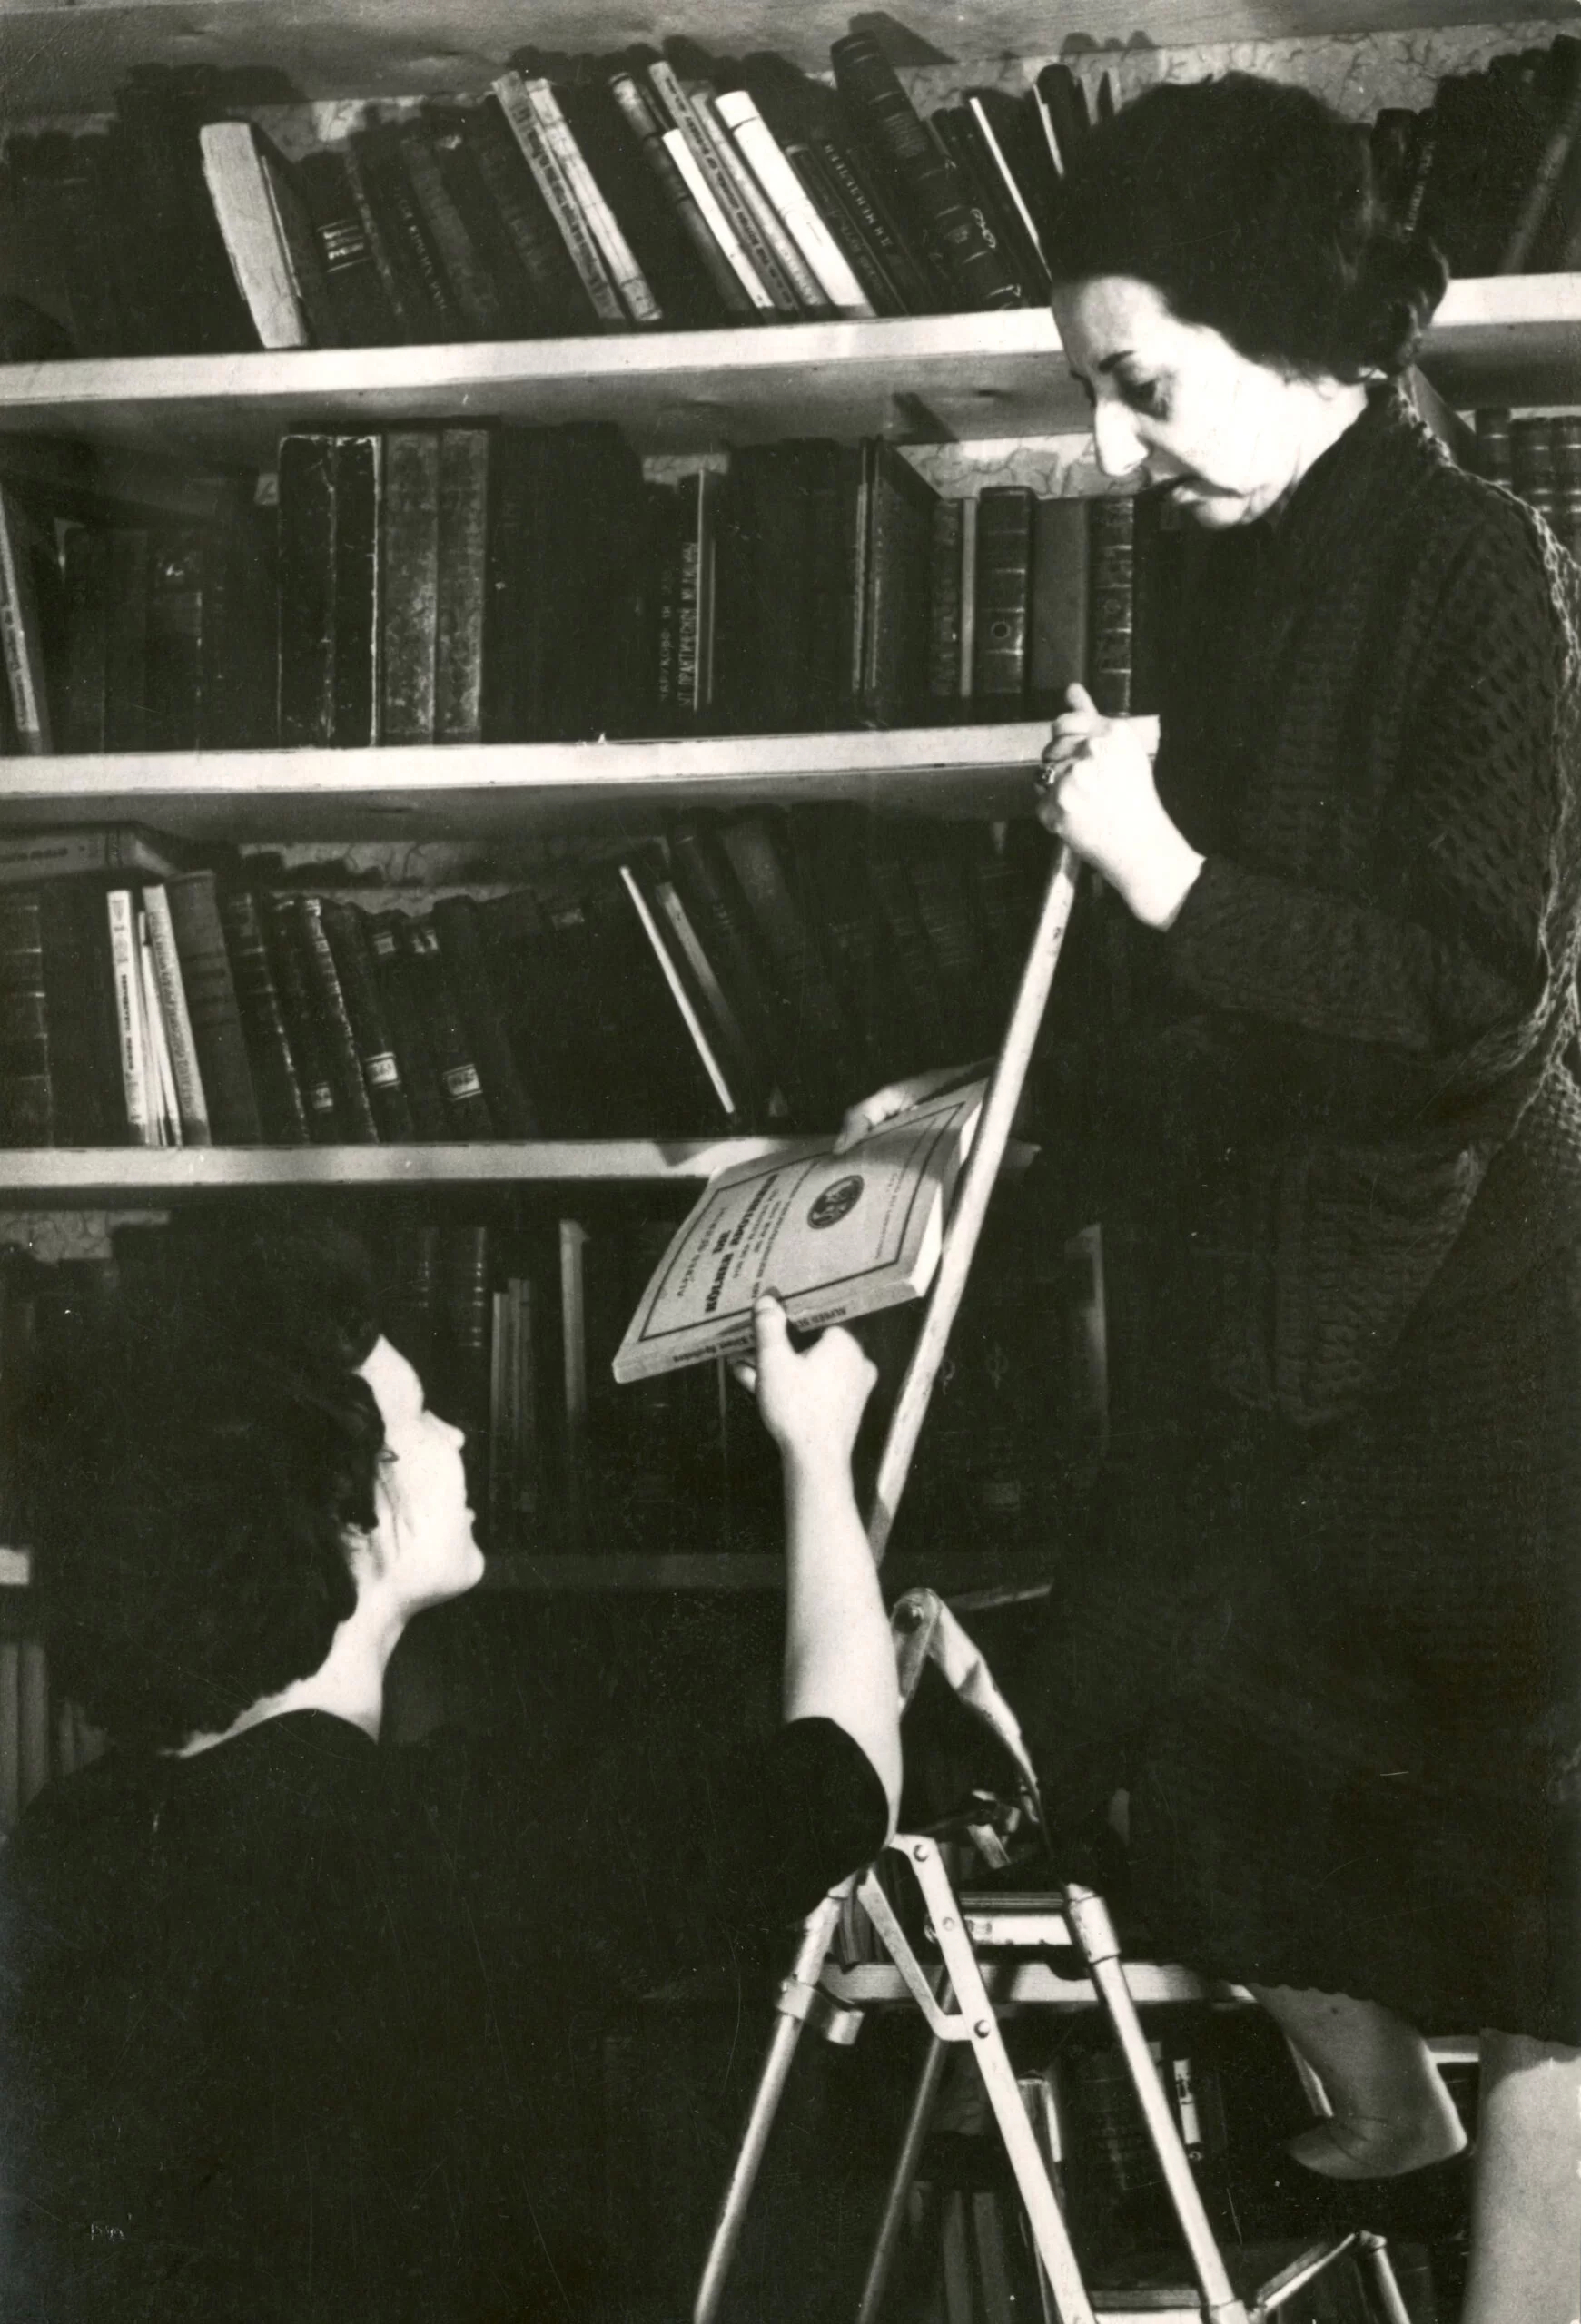 Photo from the museum library. Two women can be seen, one climbing the stairs and handing the book to the other. In the background is a large shelf full of books.